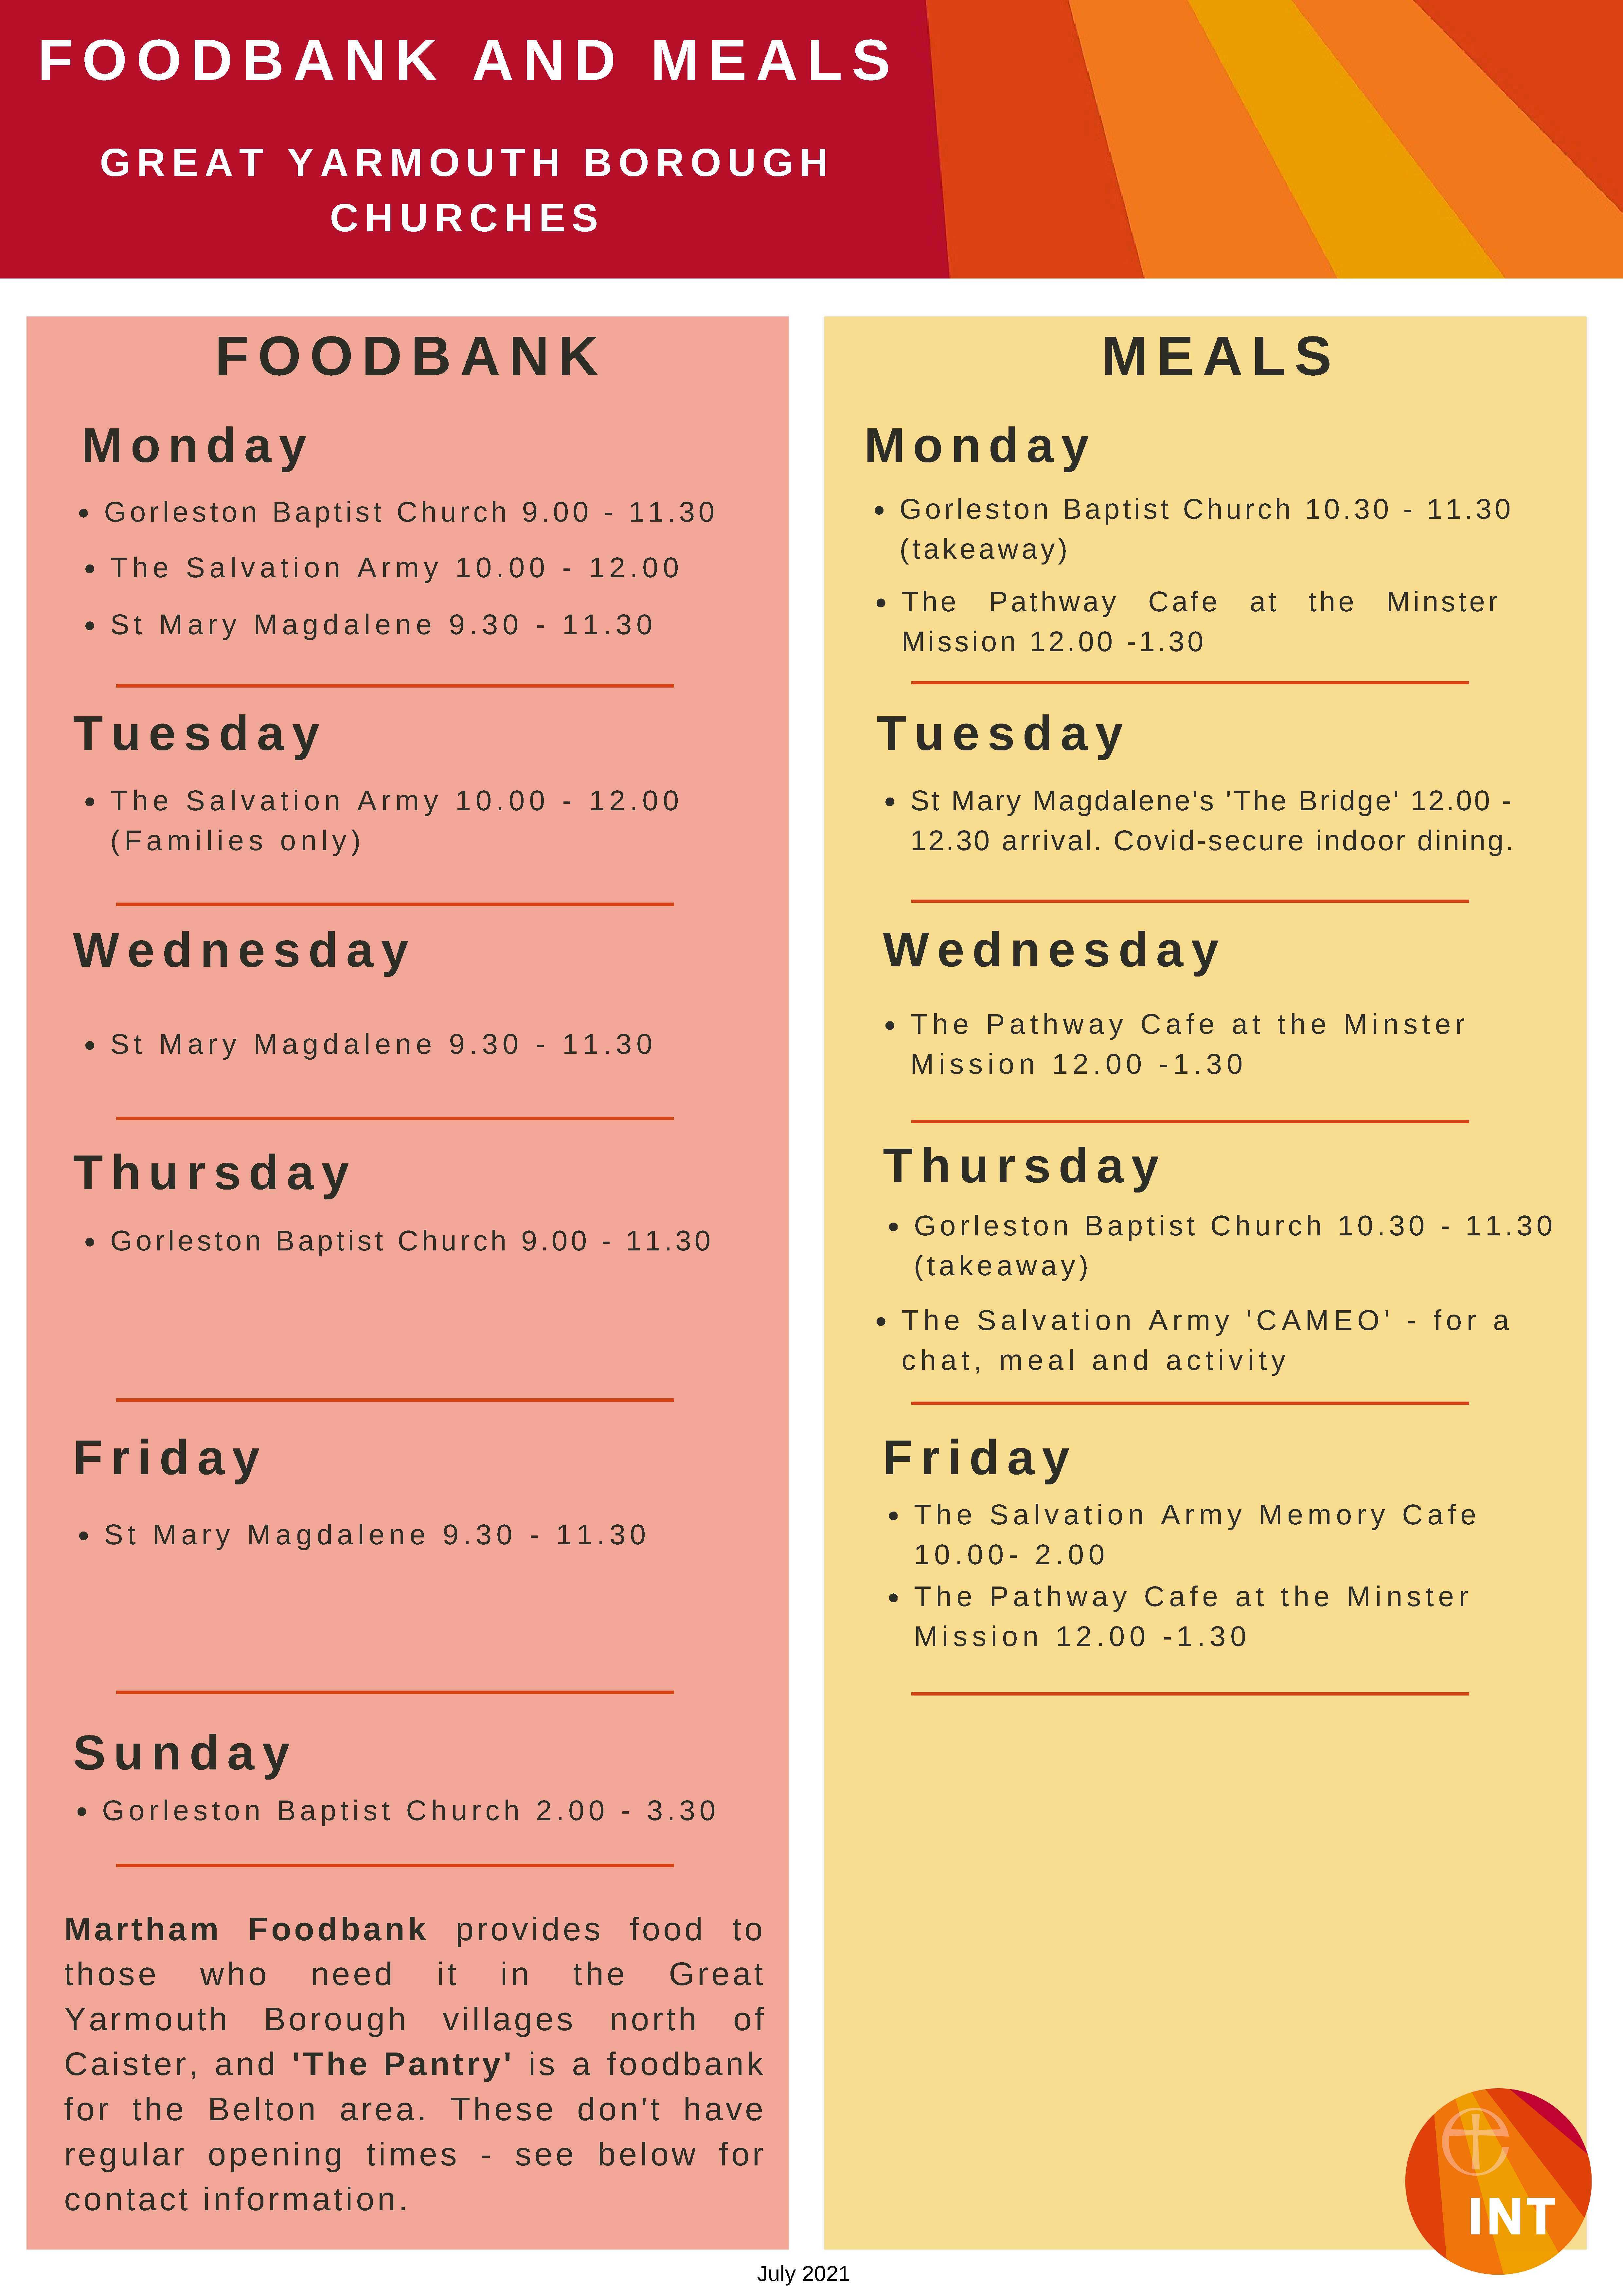 Foodbank-and-Meals-07-2021 1